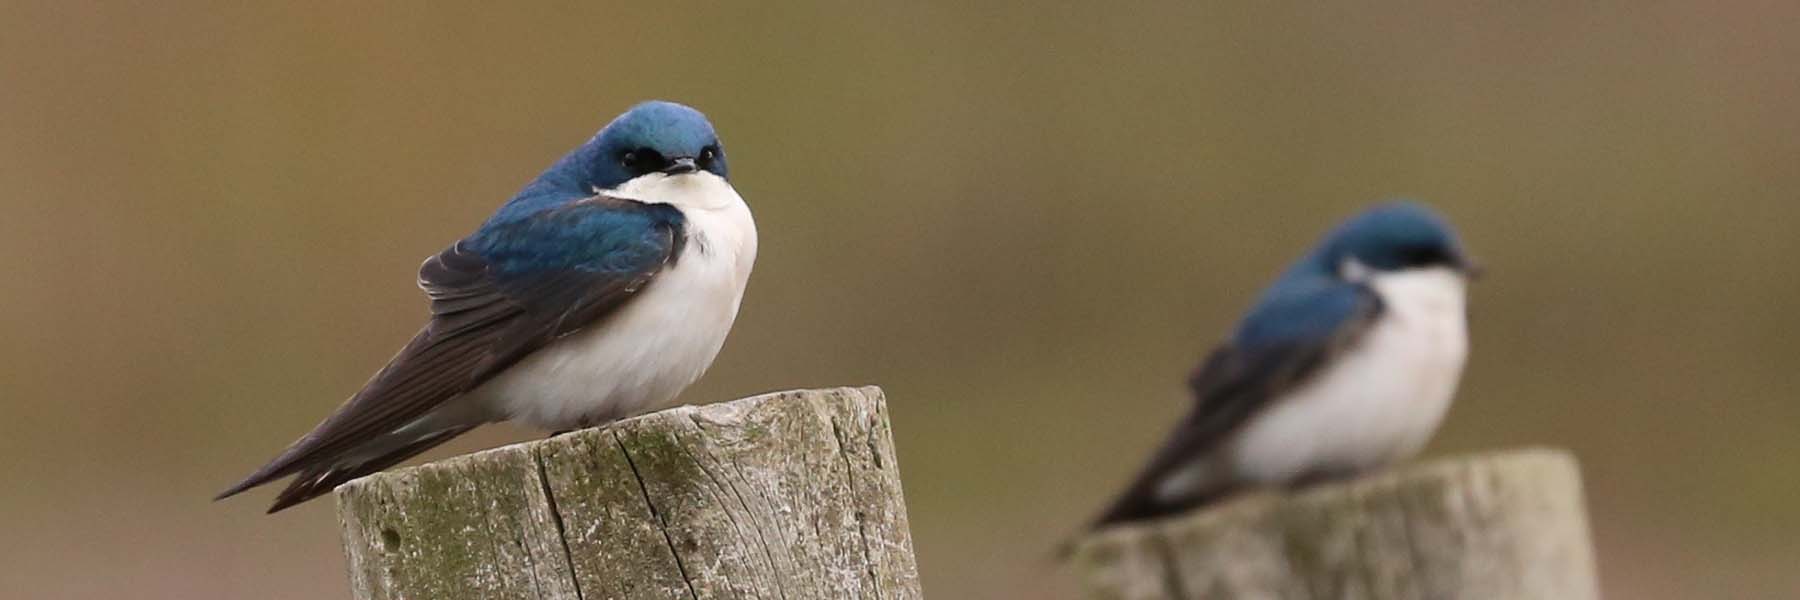 Two Tree Swallows perched on wooden posts.